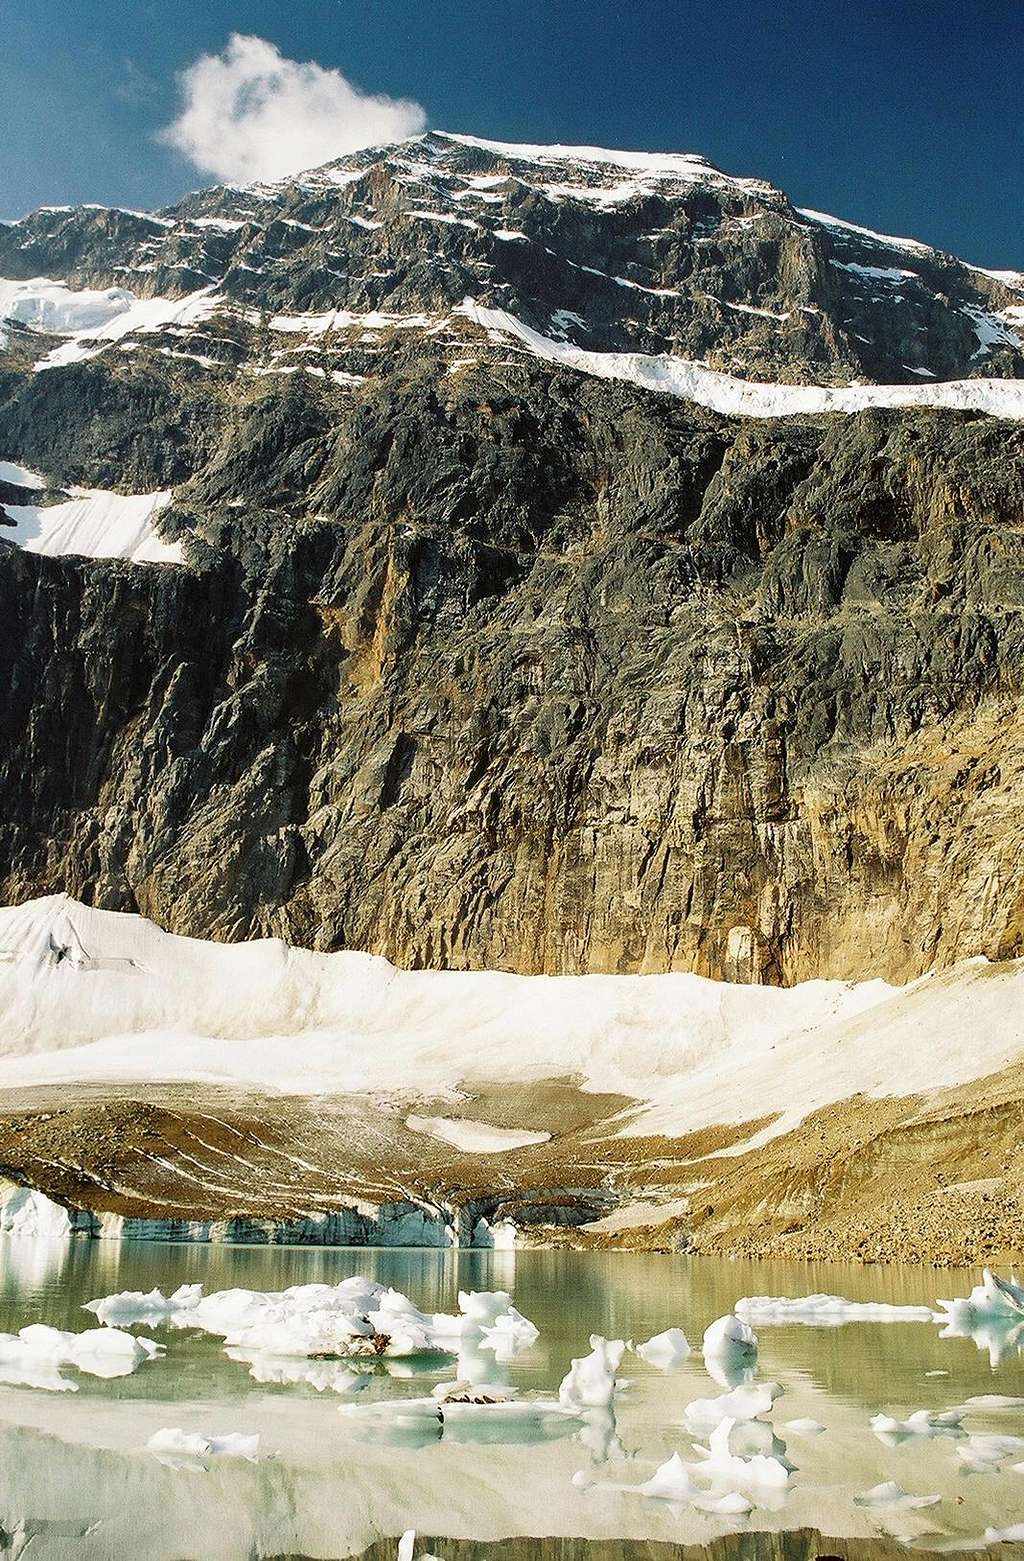 Mount Edith Cavell and Cavell Pond